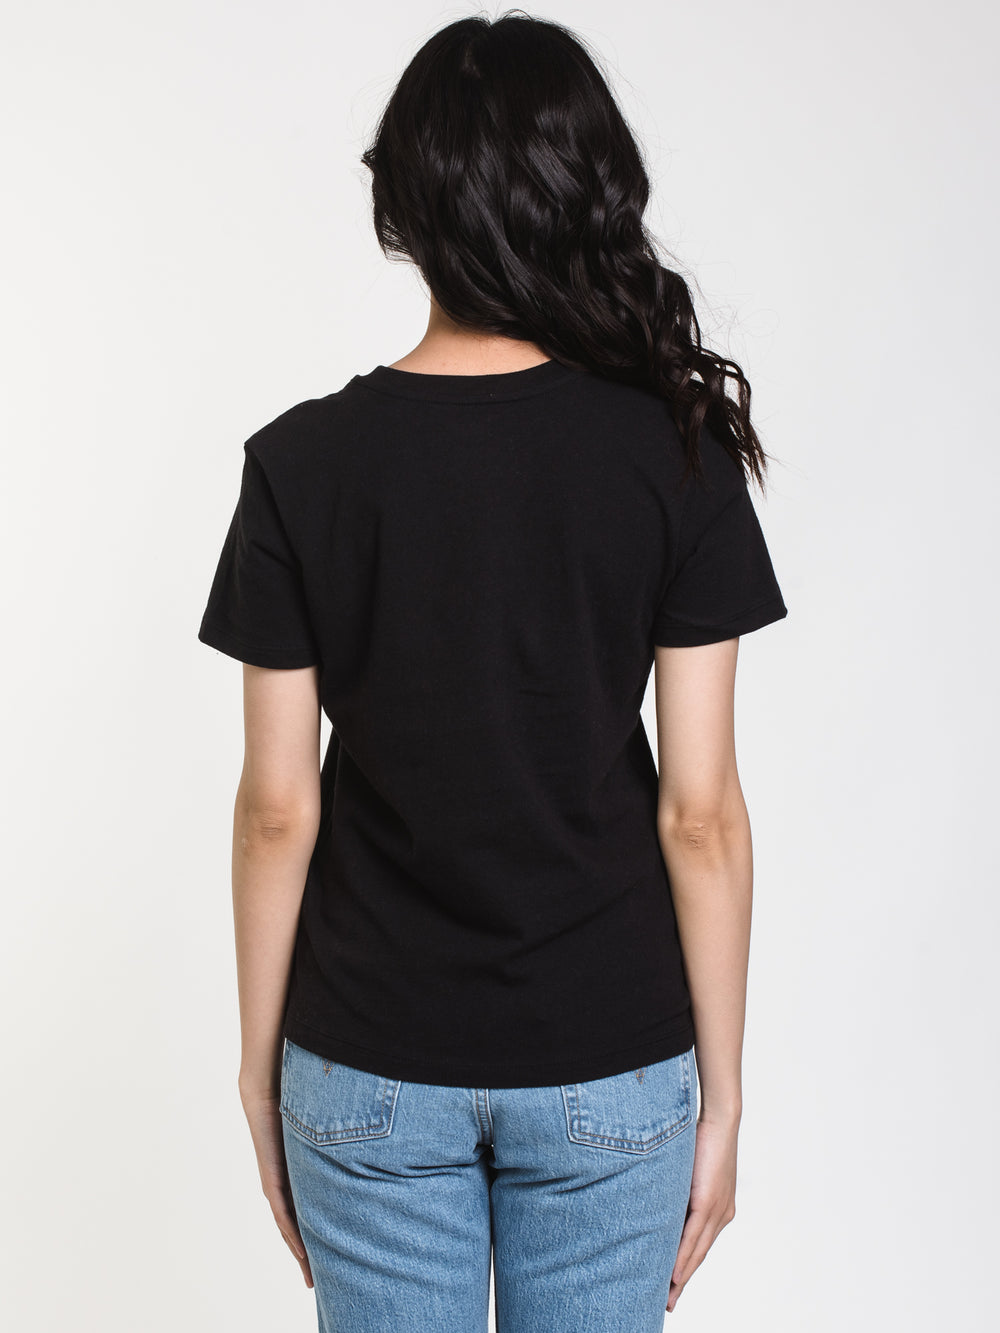 WOMENS GRAPHIC SHORT SLEEVE CREW TEE - BLACK - CLEARANCE